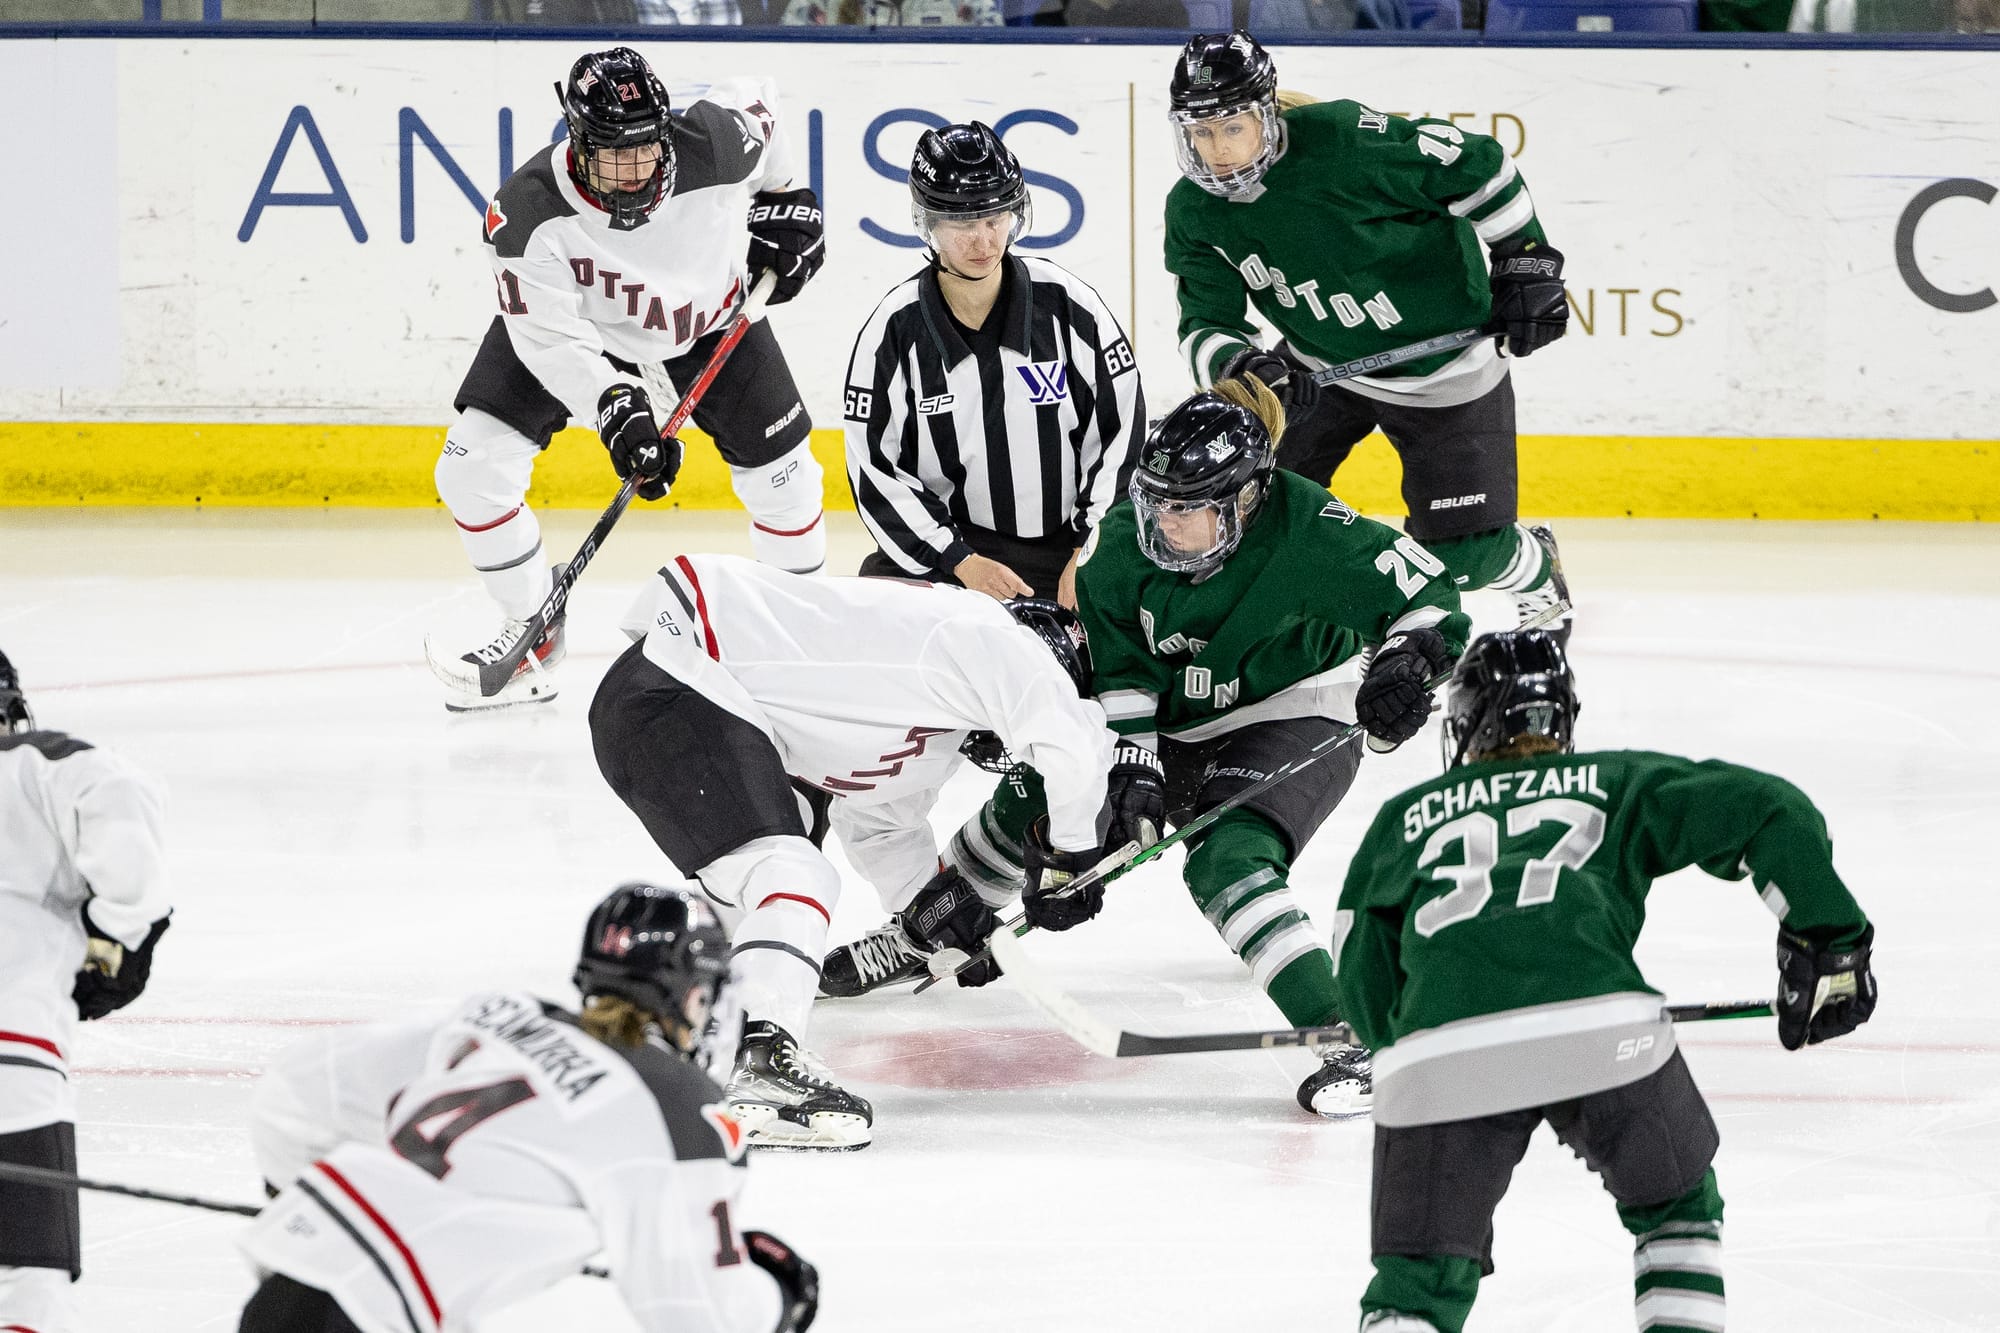 Hannah Brandt's line takes a face off against Ottawa. Boston is wearing green, while Ottawa is wearing white. A linesperson is standing in the middle of the two teams.